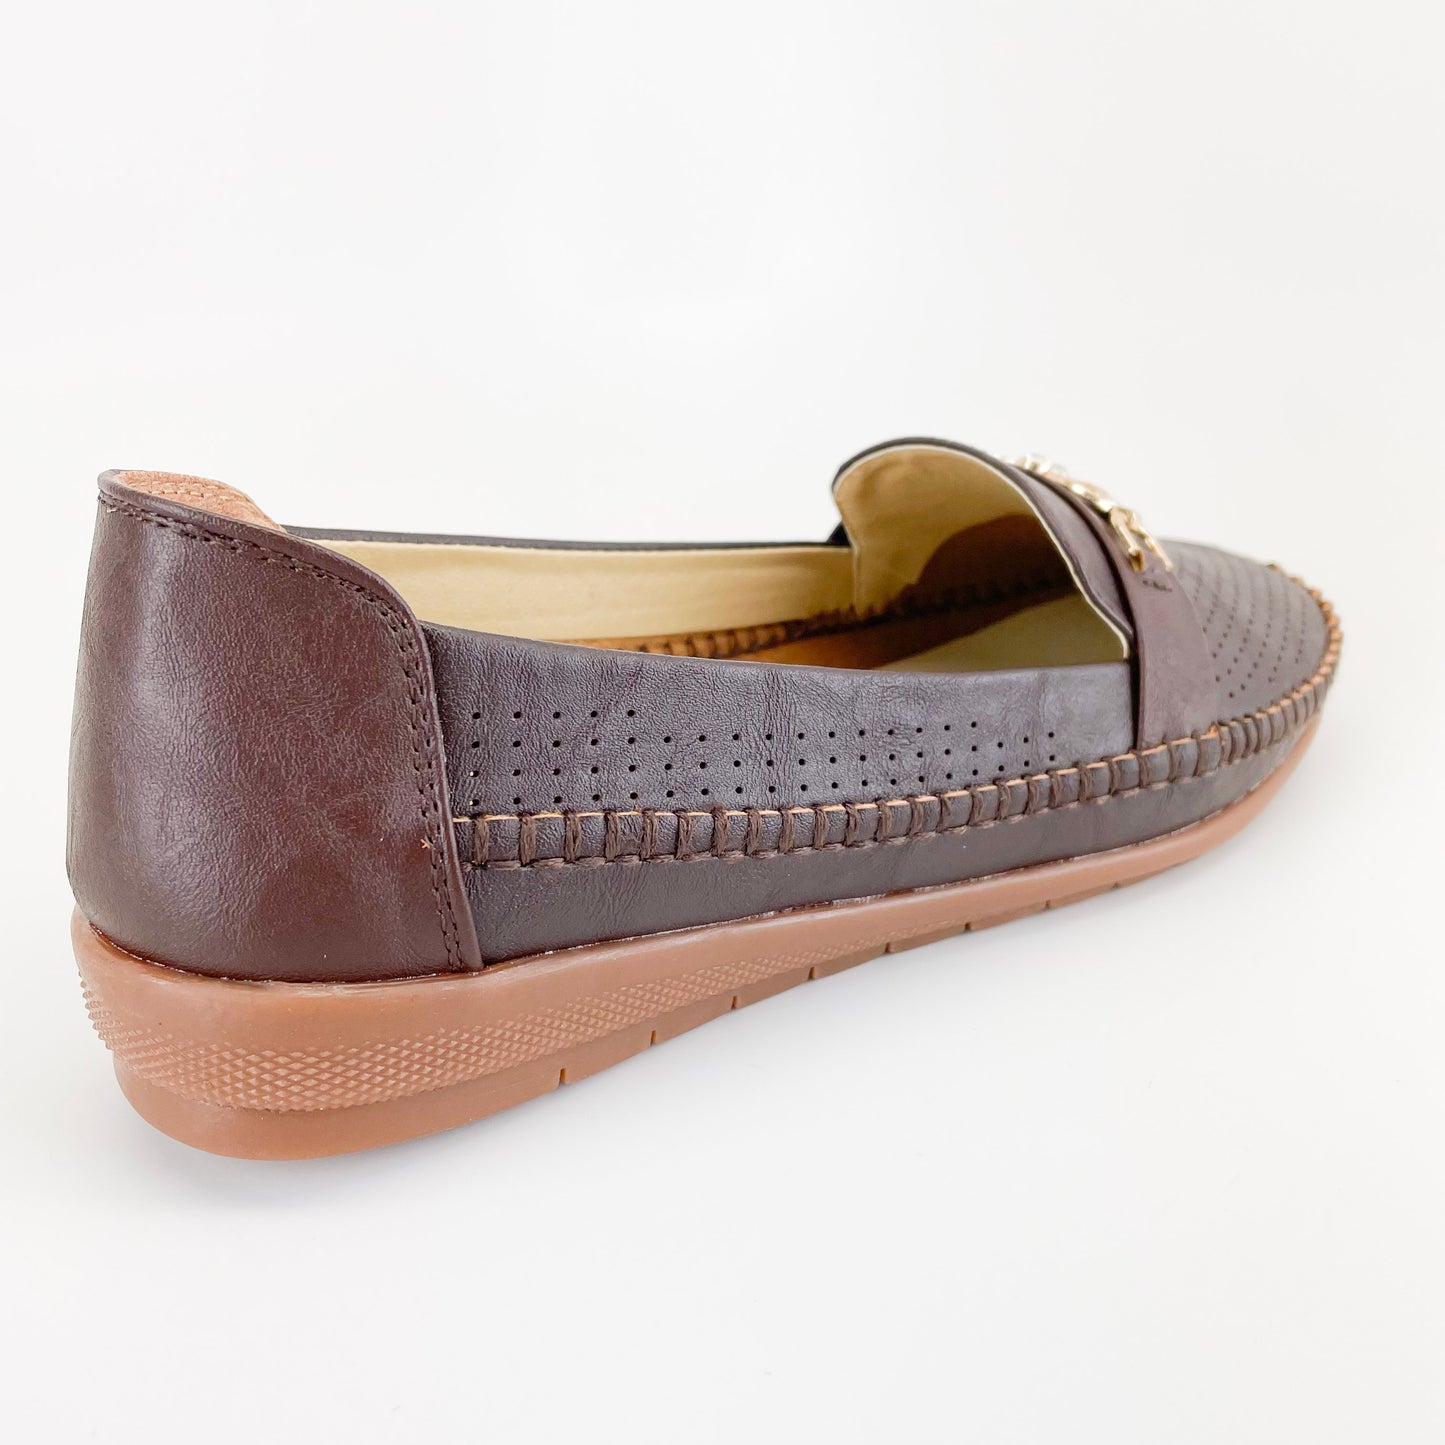 "Fiona" Comfort Loafers